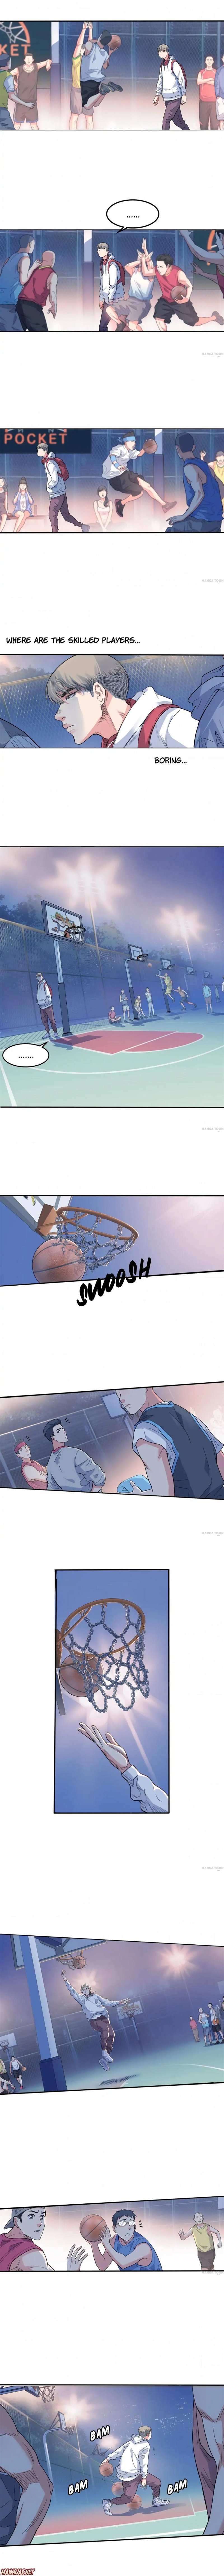 Streetball in the Hood Chapter 10 - Page 1